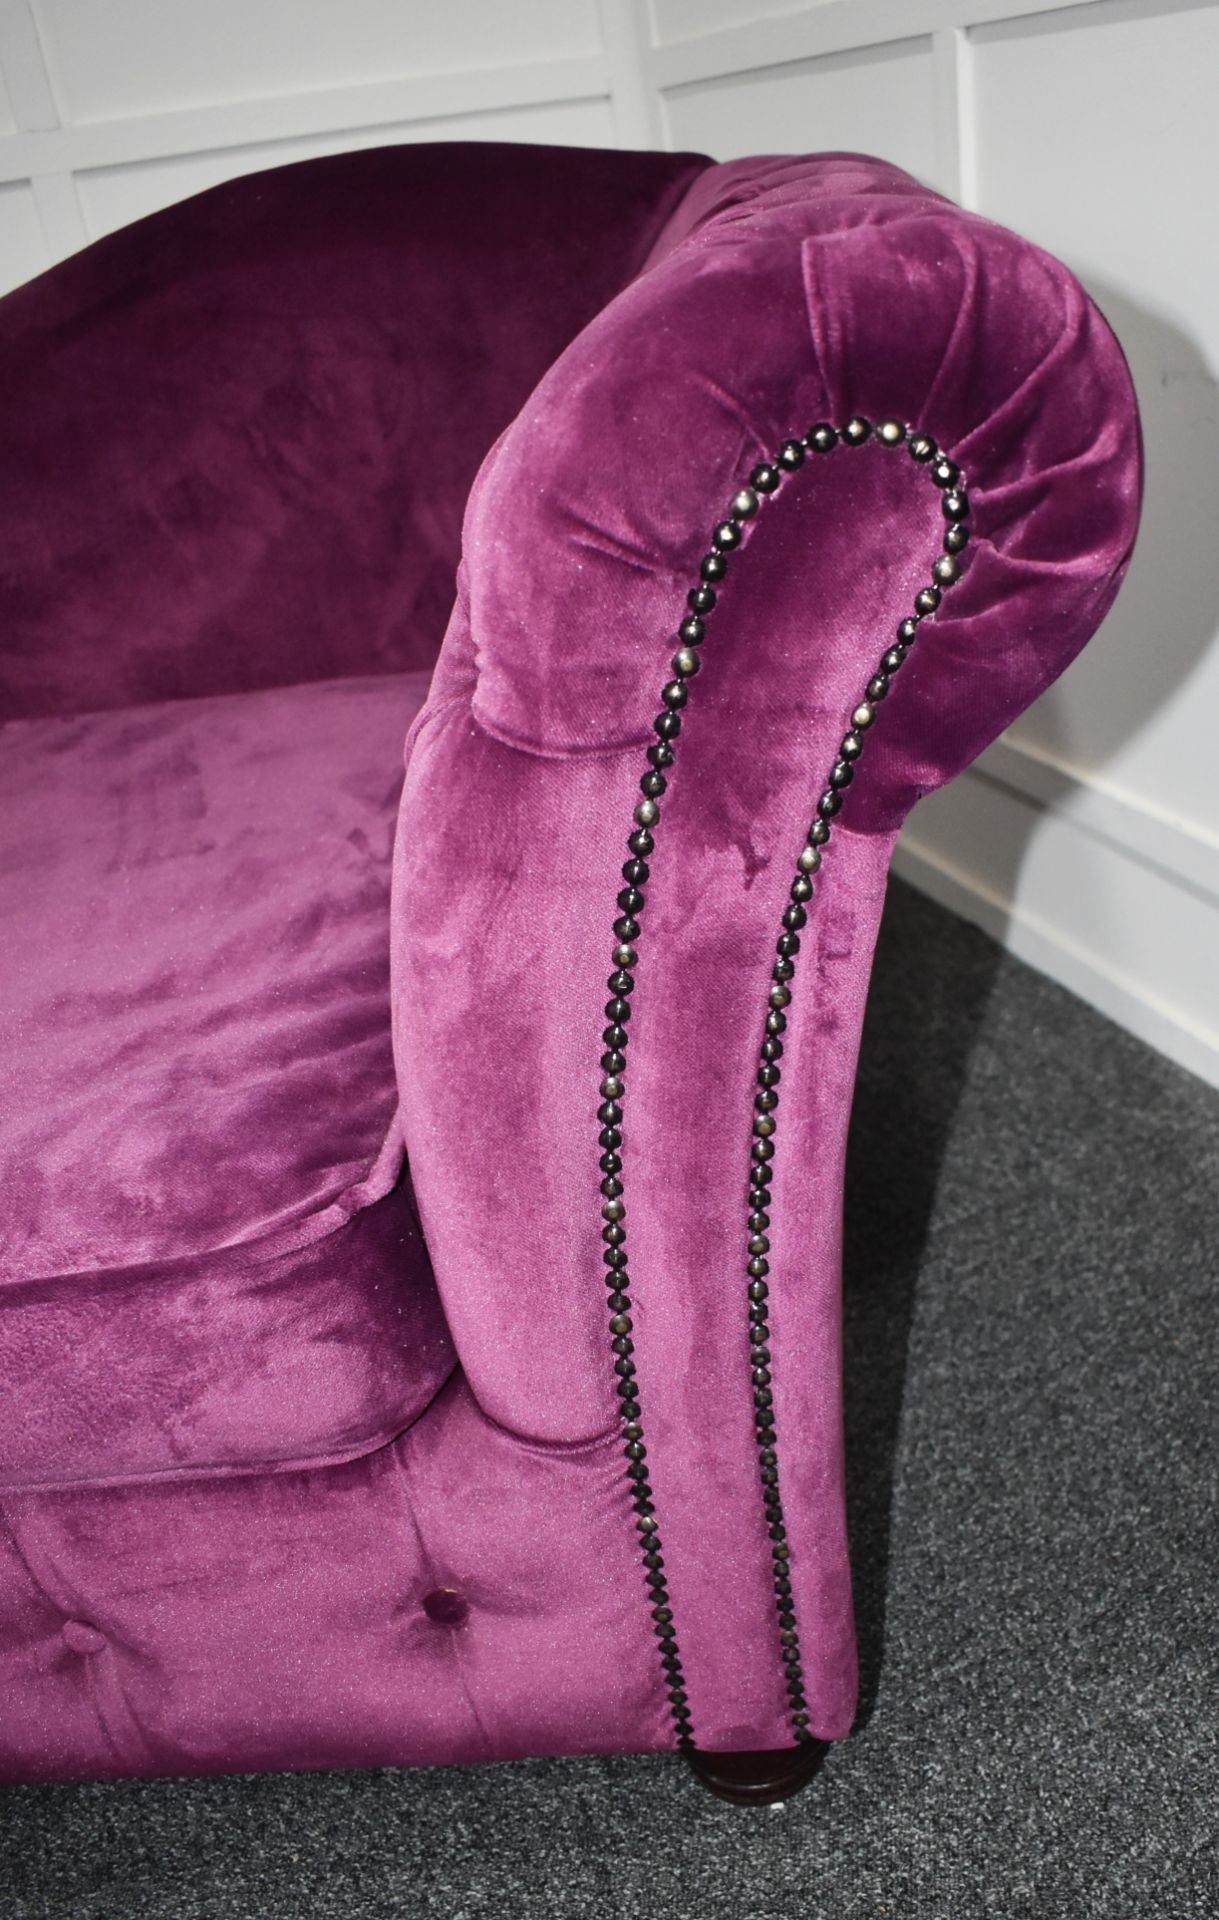 1 x Elegant Chesterfield-style Button-back Chaise Lounge, Richly Upholstered in a Mulberry - Image 2 of 10